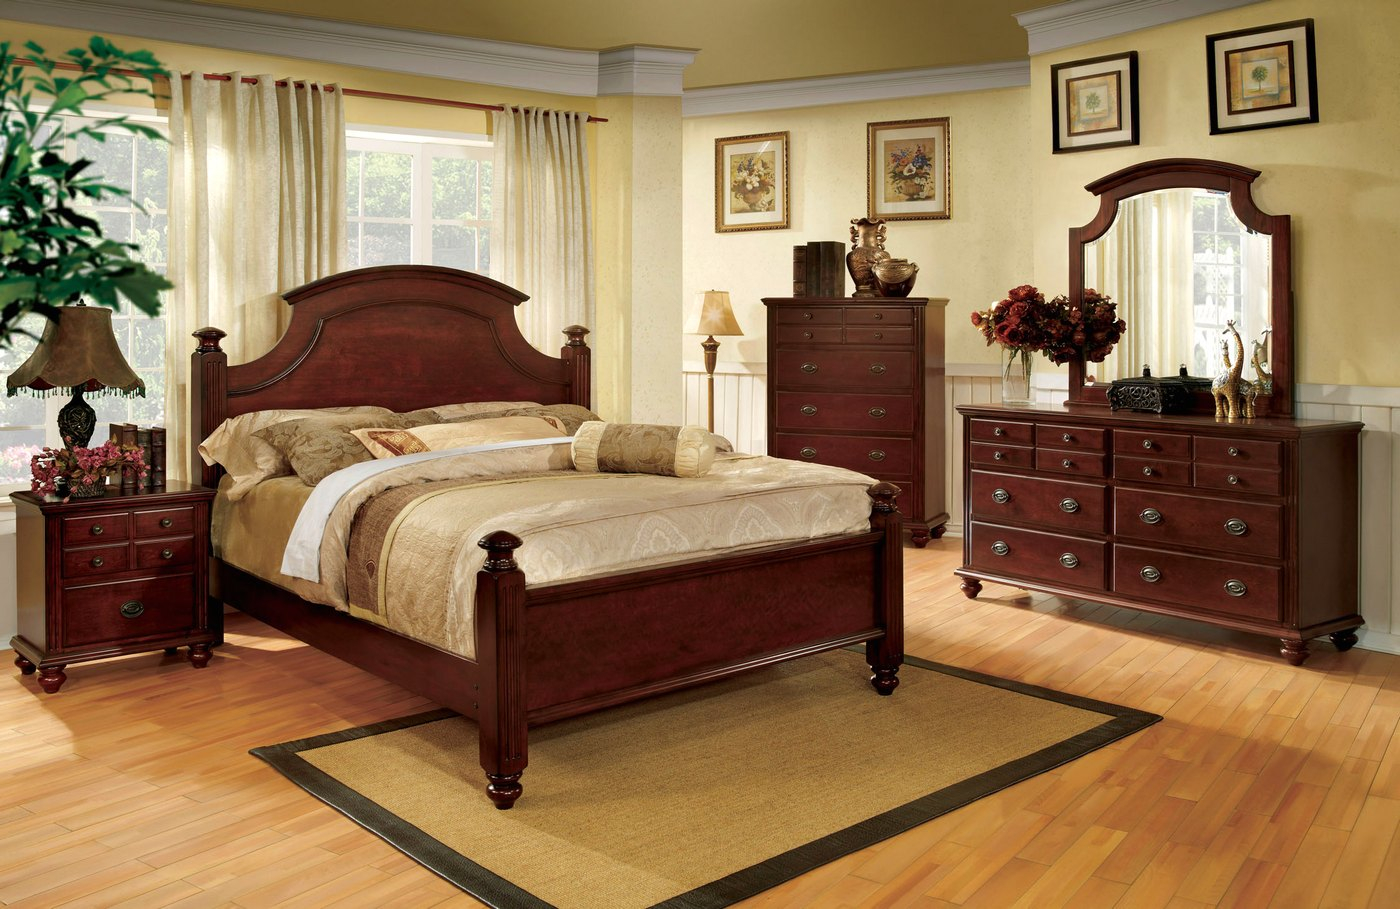 Details About Marianna Classic Tradition 4p Queen Bedroom Set Antique Gold Cherry Brown Finish with regard to proportions 1400 X 909